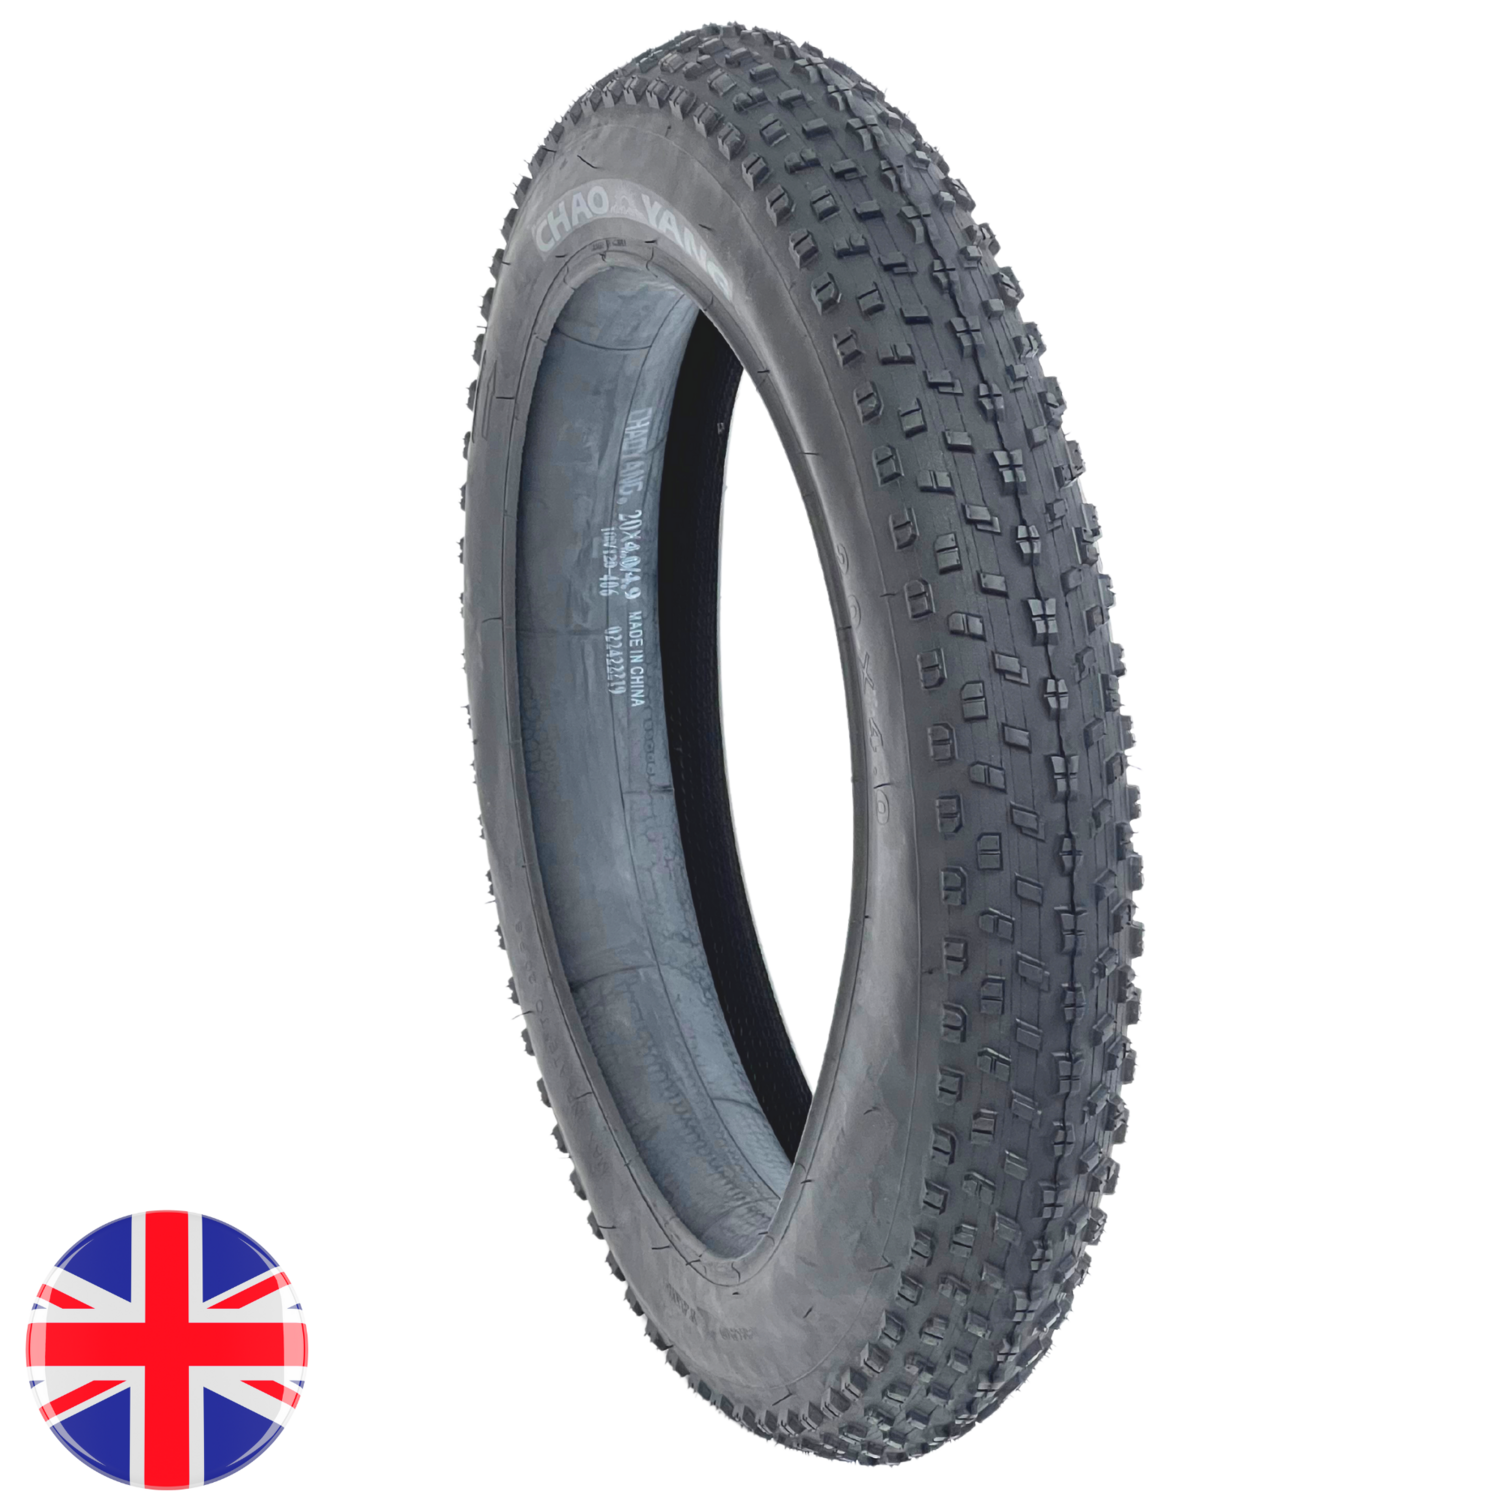 CHAOYANG E6 E7 E3 Electric Bike Delivery eBike Fat Tyre 20 X 4.0 Inch with Standard Valve Inner Tube